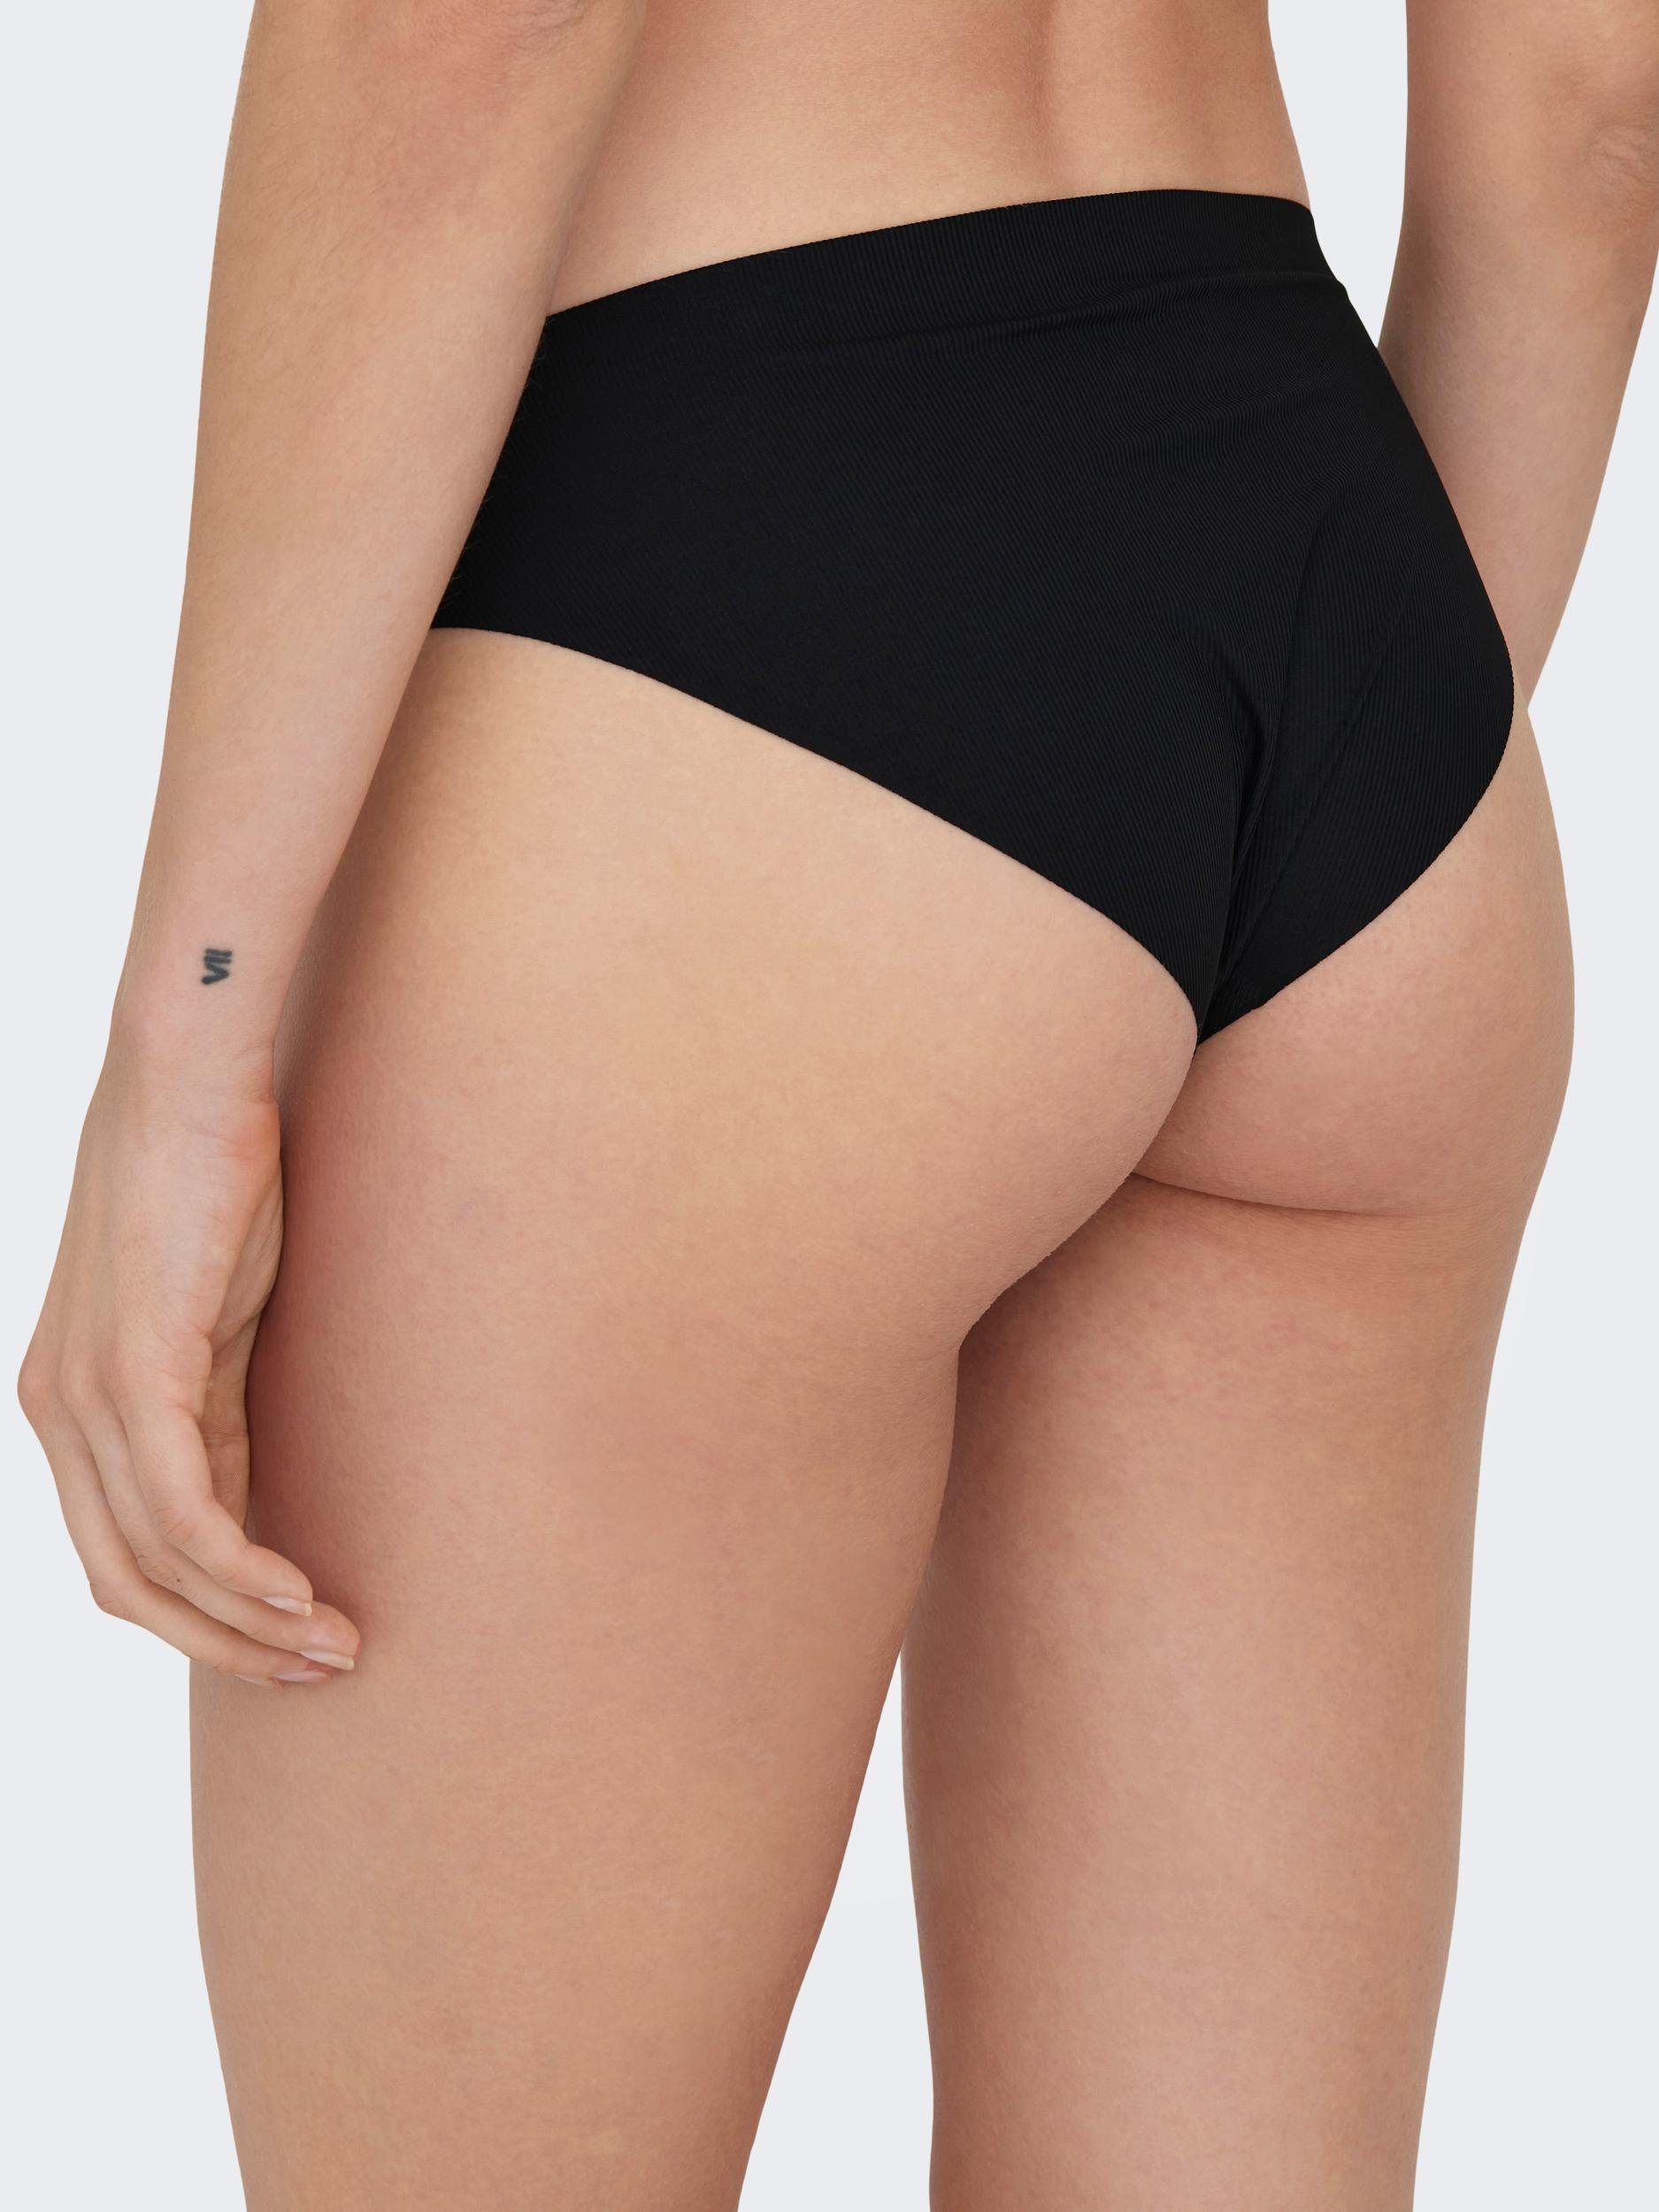 BRIEF 3-St) Slip 3-PACK (Set, INVISIBLE ONLY Black RIB ONLTRACY